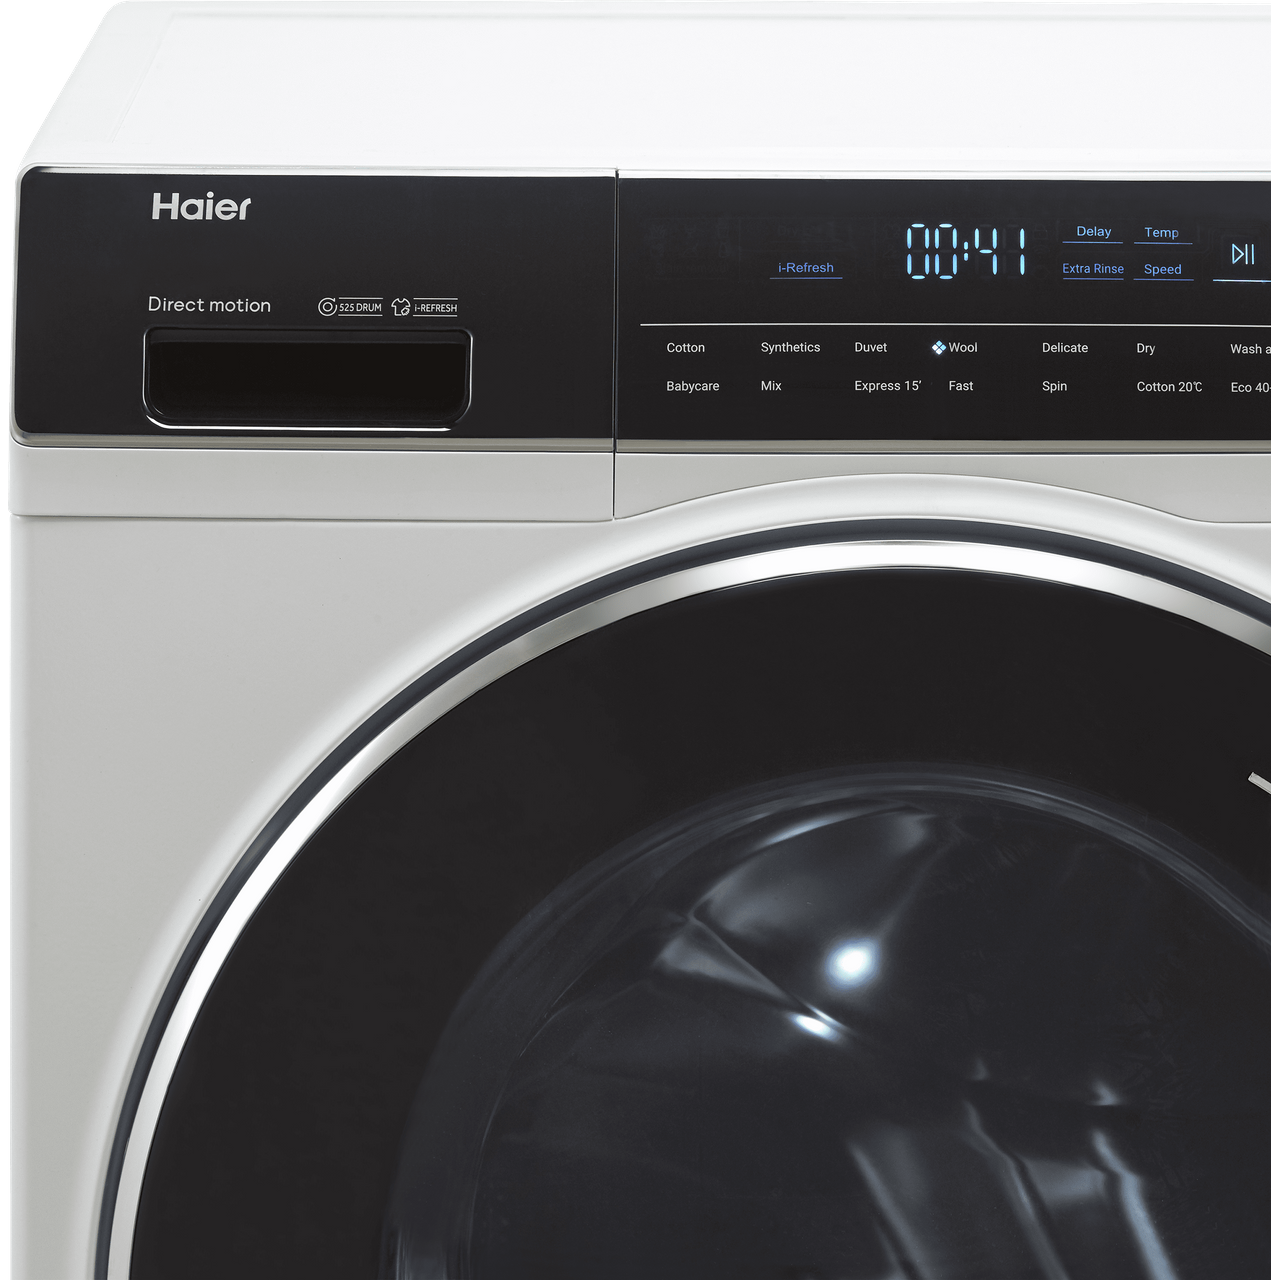 Haier - Spotless: this is how the Haier HWD120-B14876